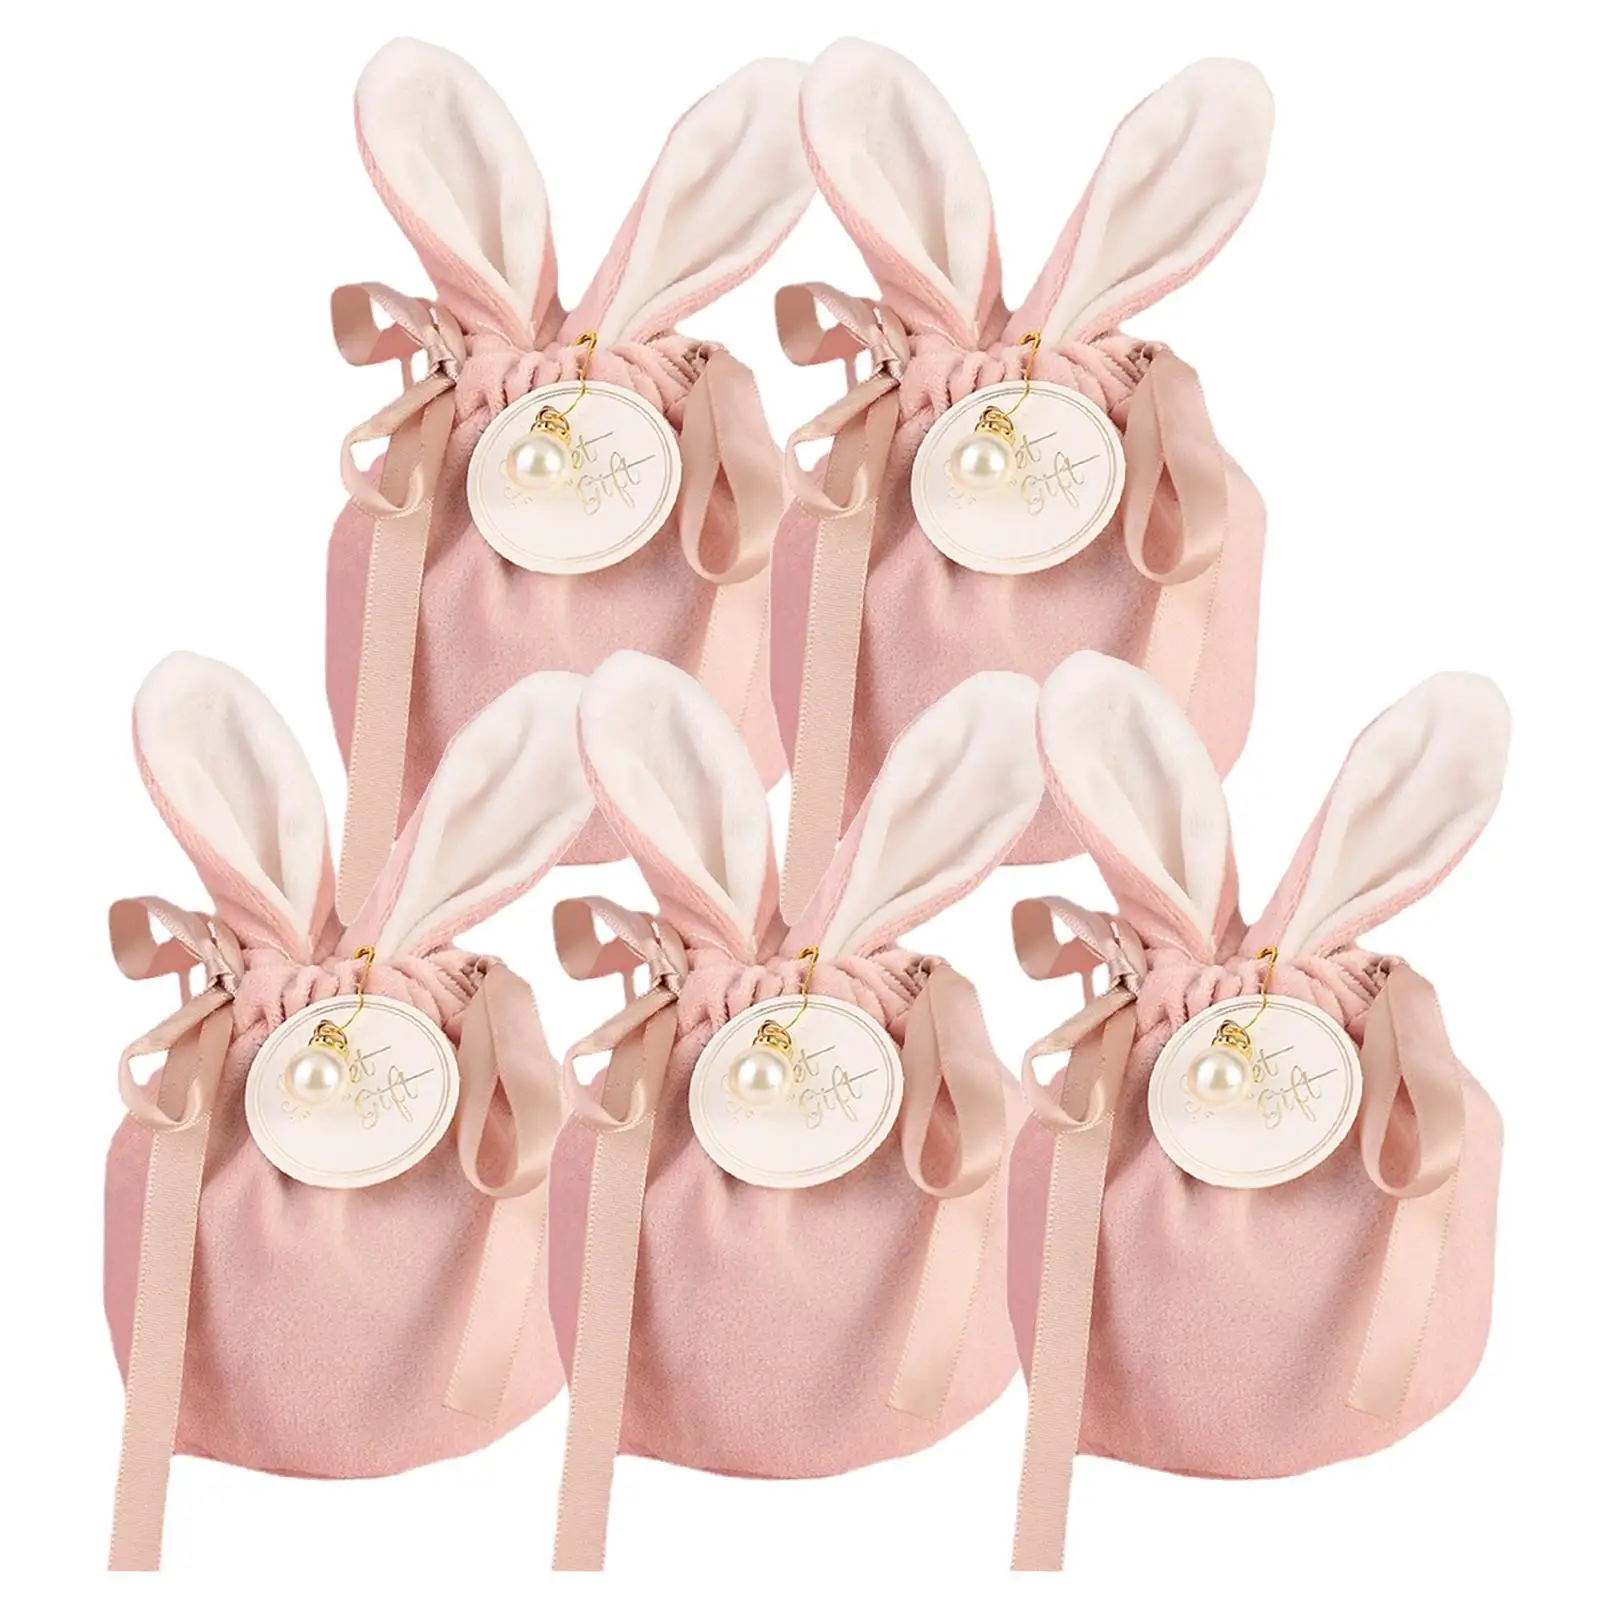 5x Bowknot Velvet Candy Bag Smooth and Soft Packing Bags Easter Cute Bunny Gift Drawstring Bags for Party Egg Hunts Festivals